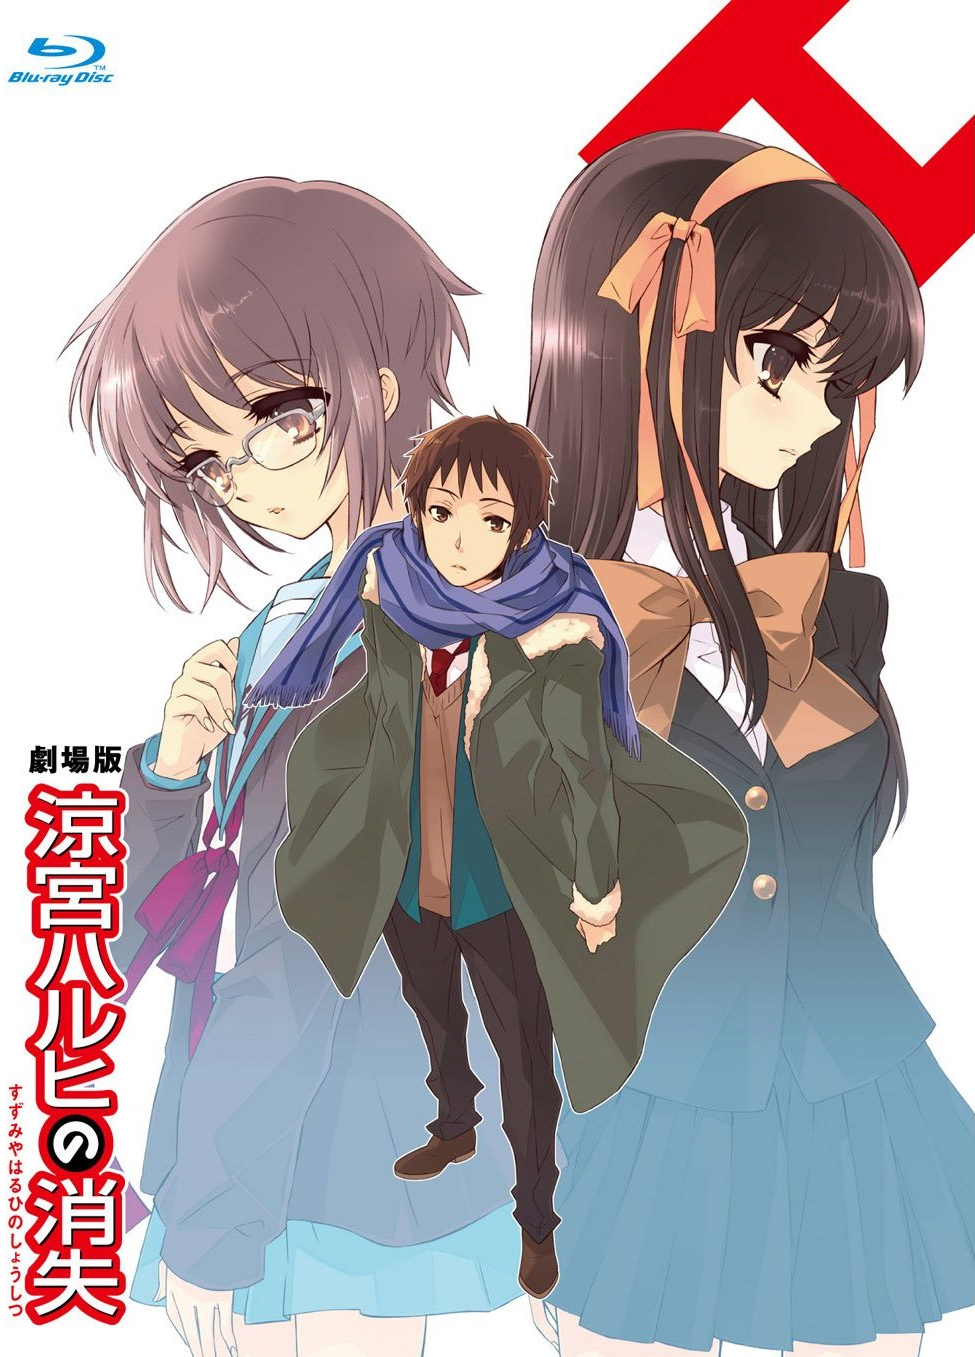 The Decision of Kyon, The Disappearance of Suzumiya Haruhi | OGIUE MANIAX